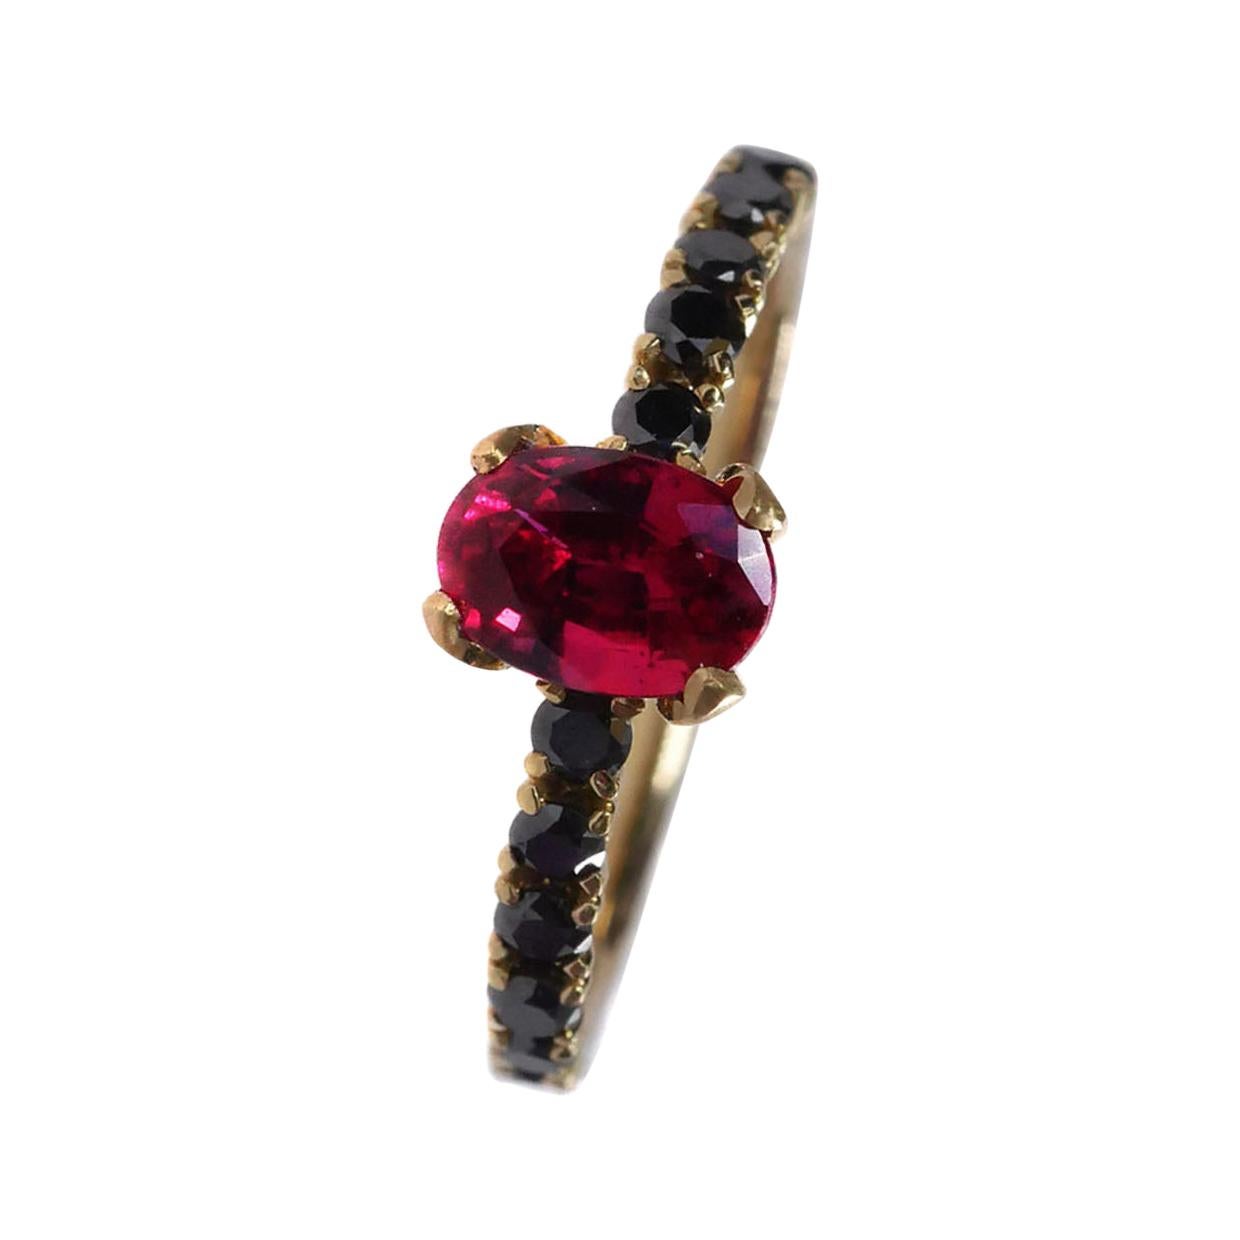 1 Carat Ruby and Black Diamond Solitaire Ring Set in 18 Karat Yellow Gold